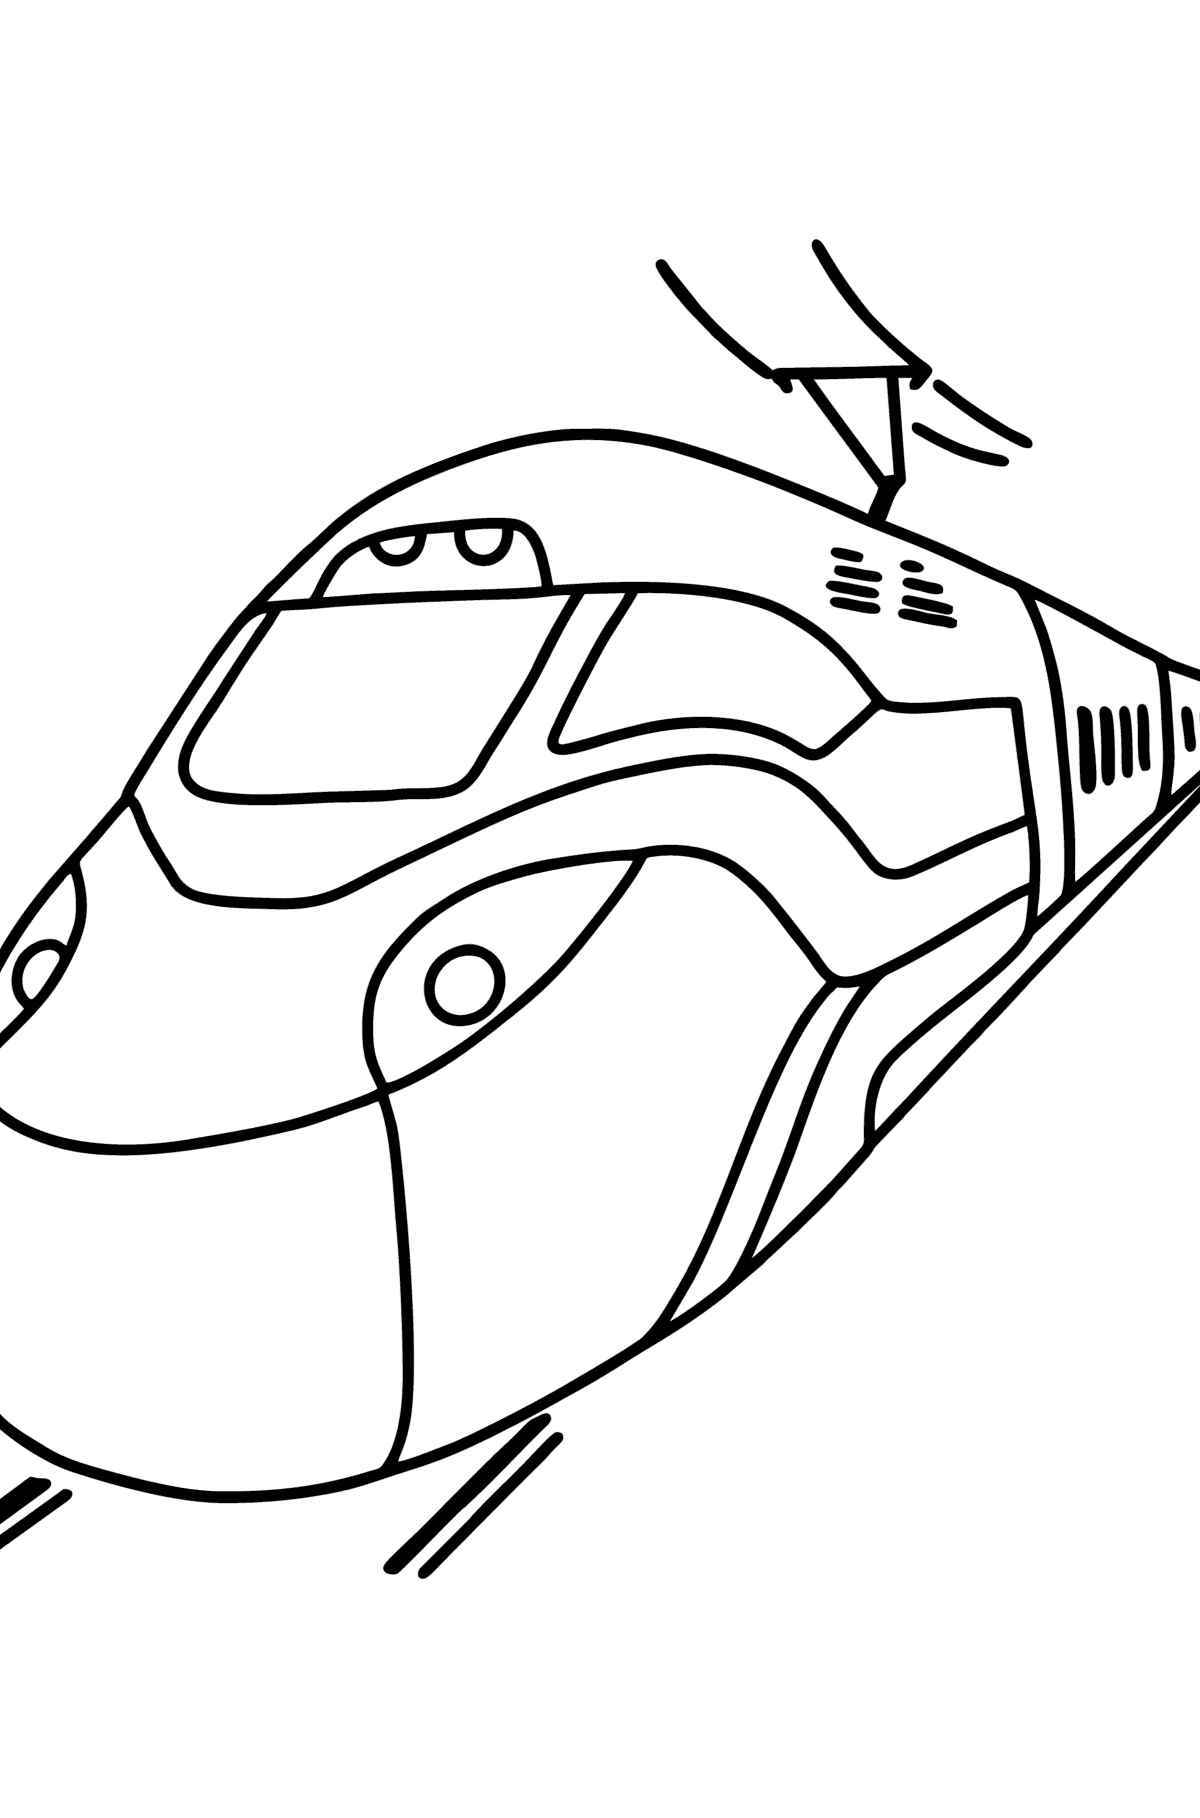 Train coloring page online - Coloring Pages for Kids